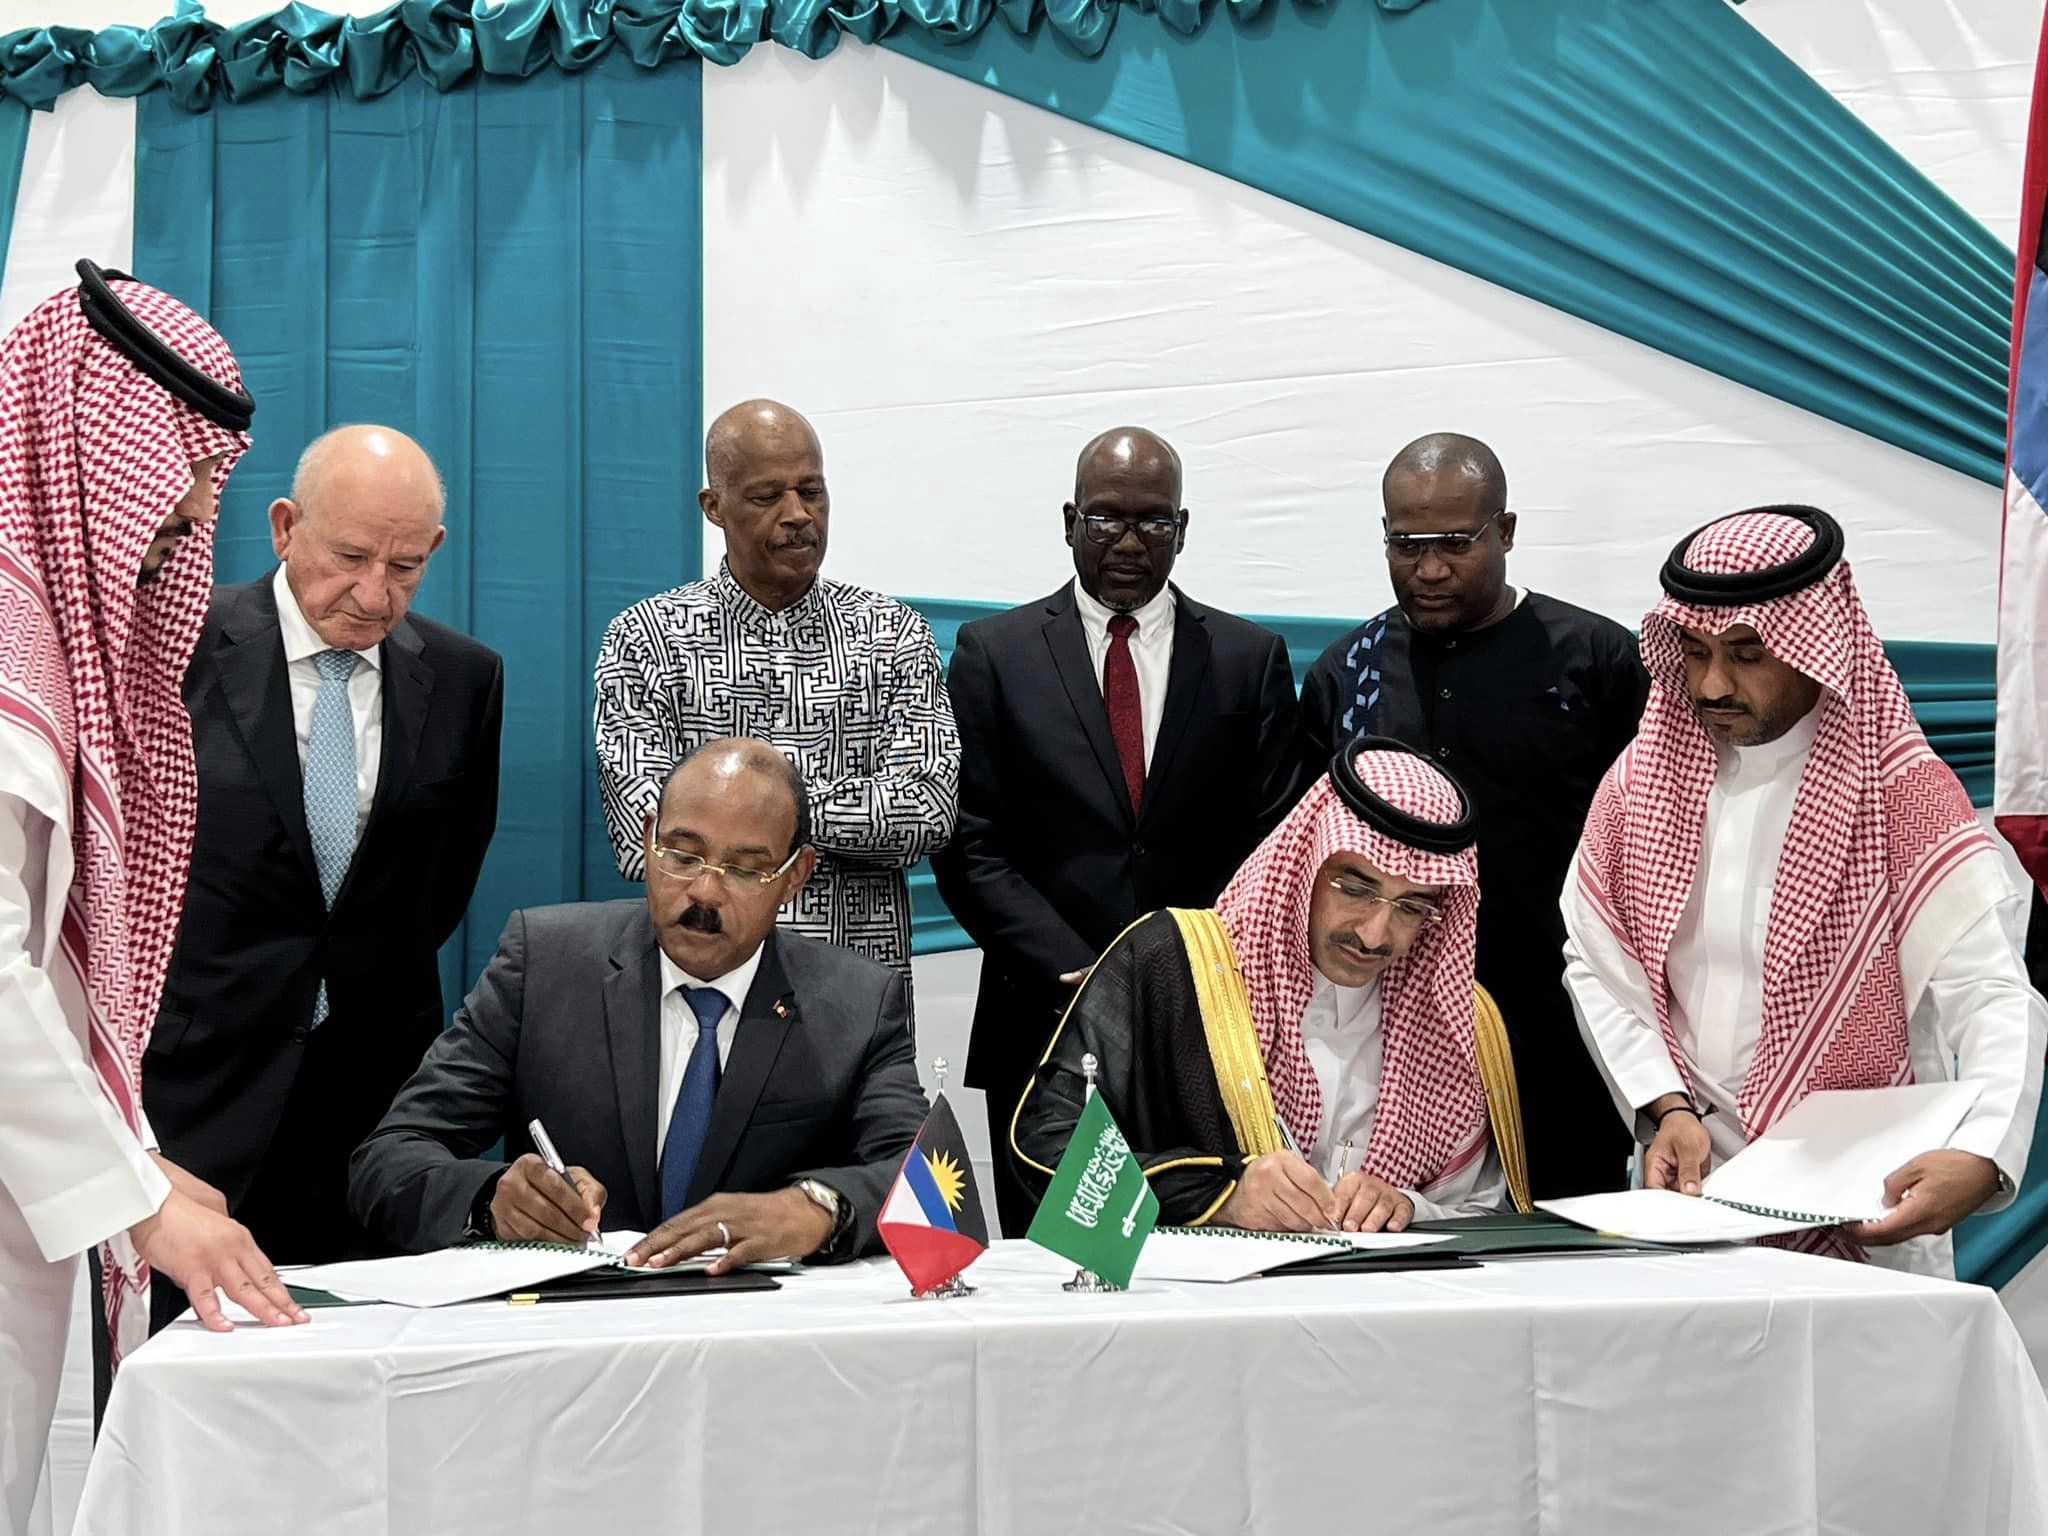 UWI Five Islands Campus Set For Magnificent Take-Off US$80 Mil Investment From Saudi Fund